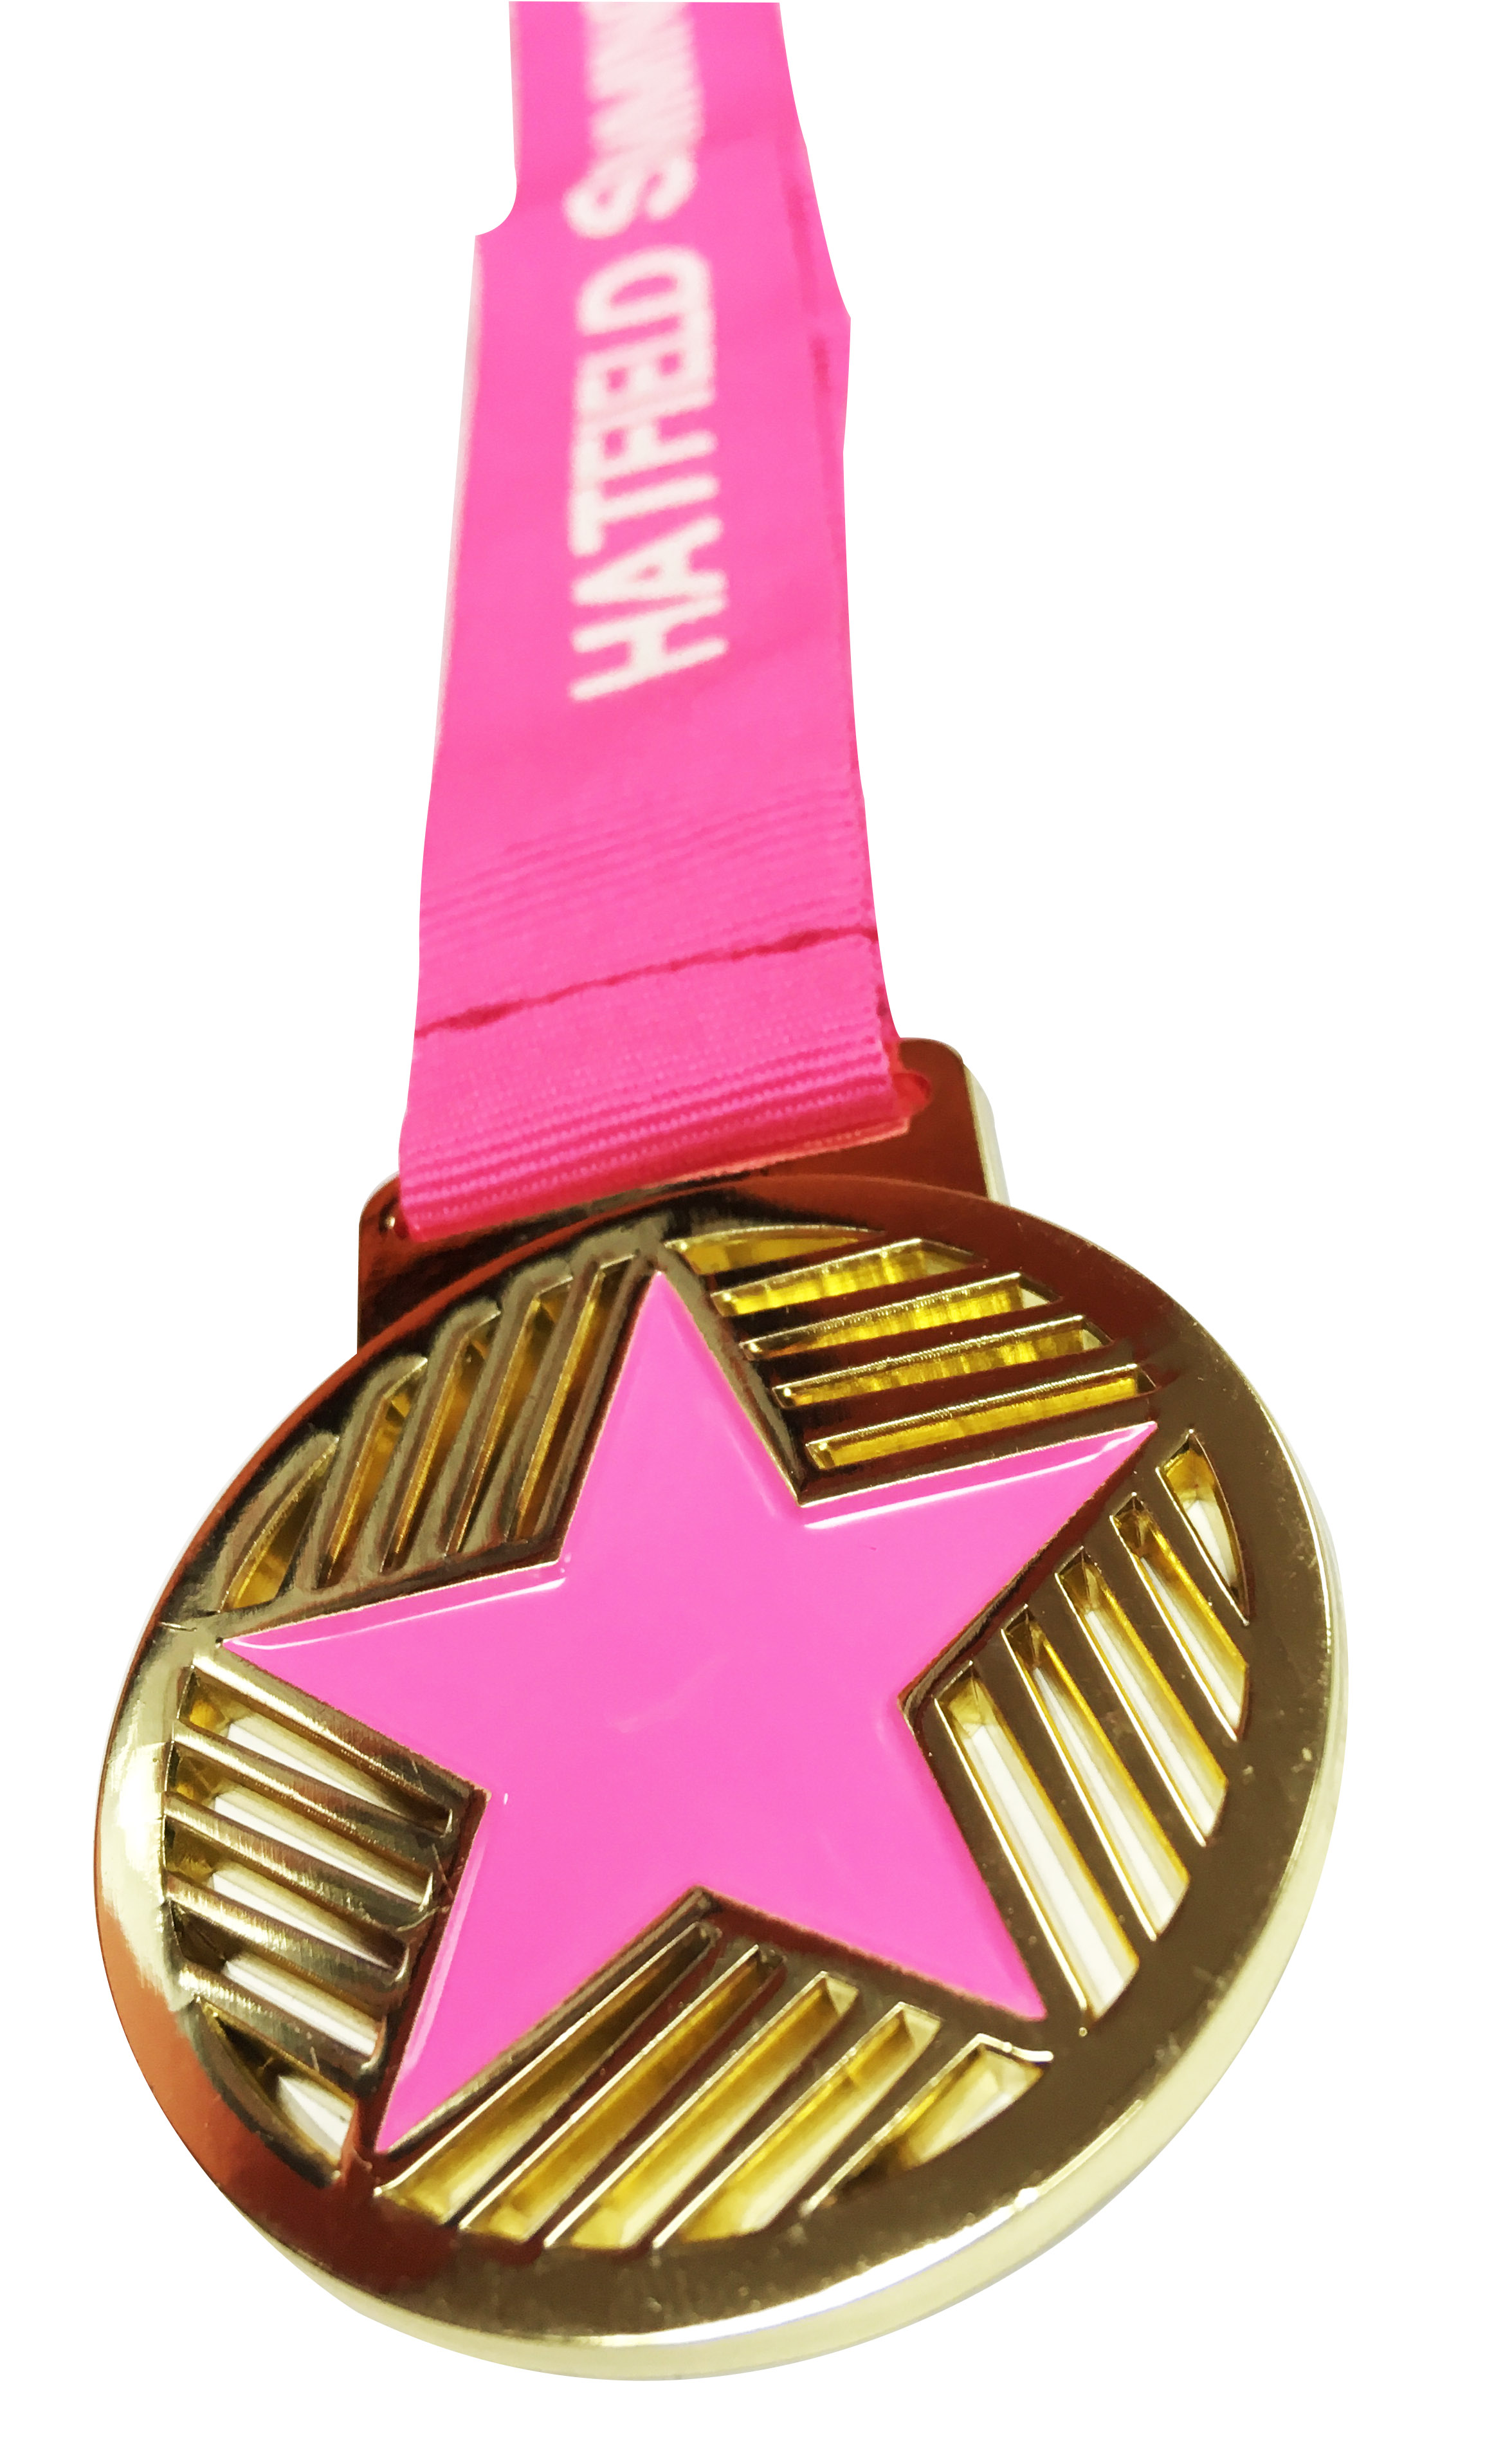 Bespoke Medals from Five Star Trophies